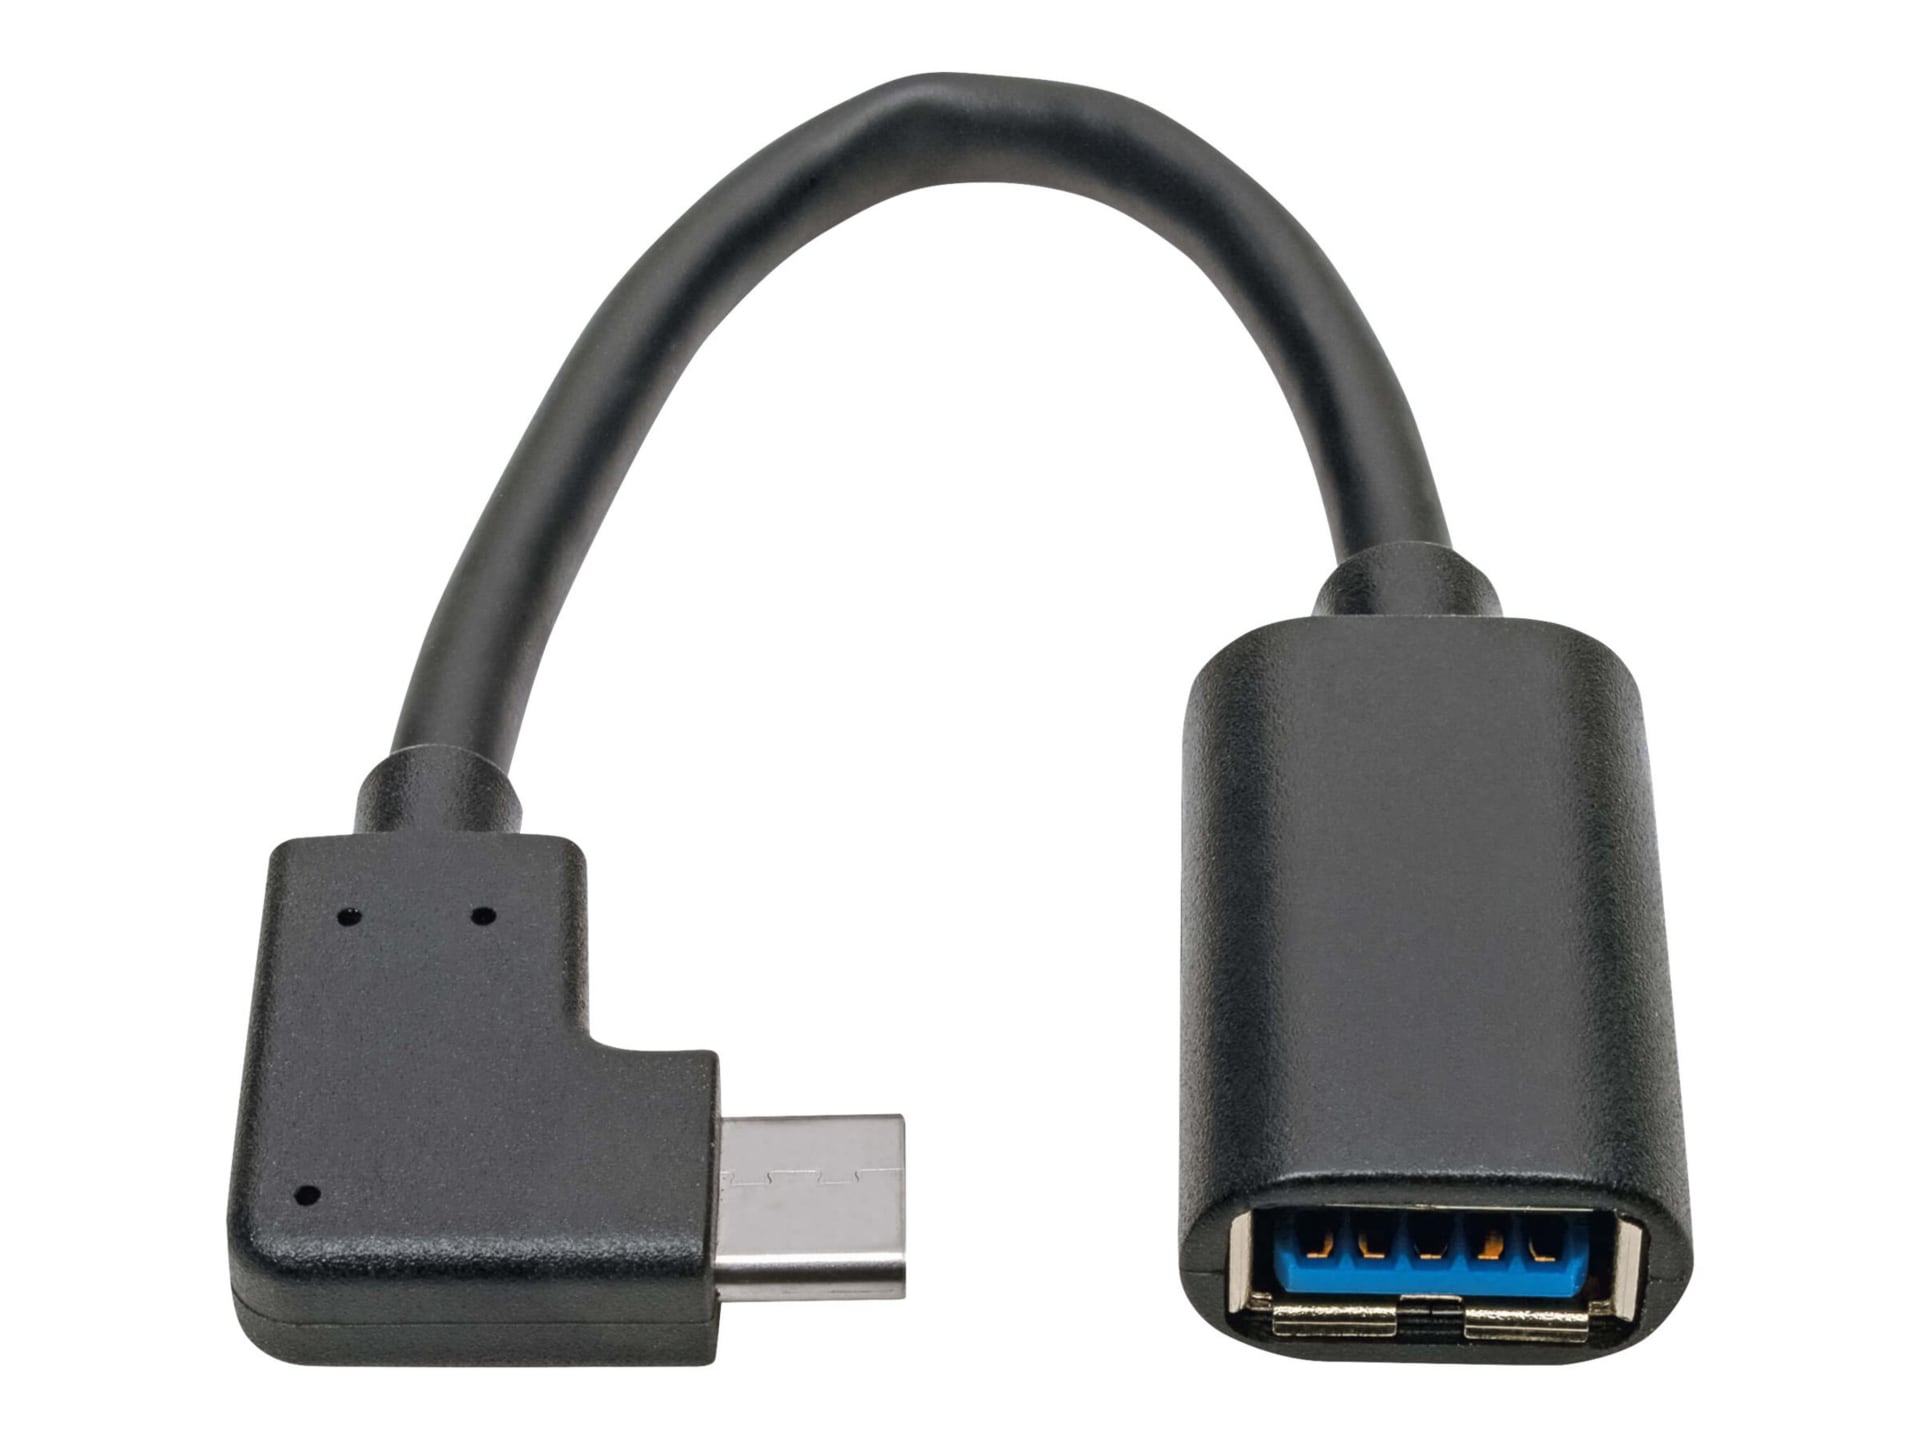 3.0 USB-C to USB-A Adapter (USB-C Adapter)